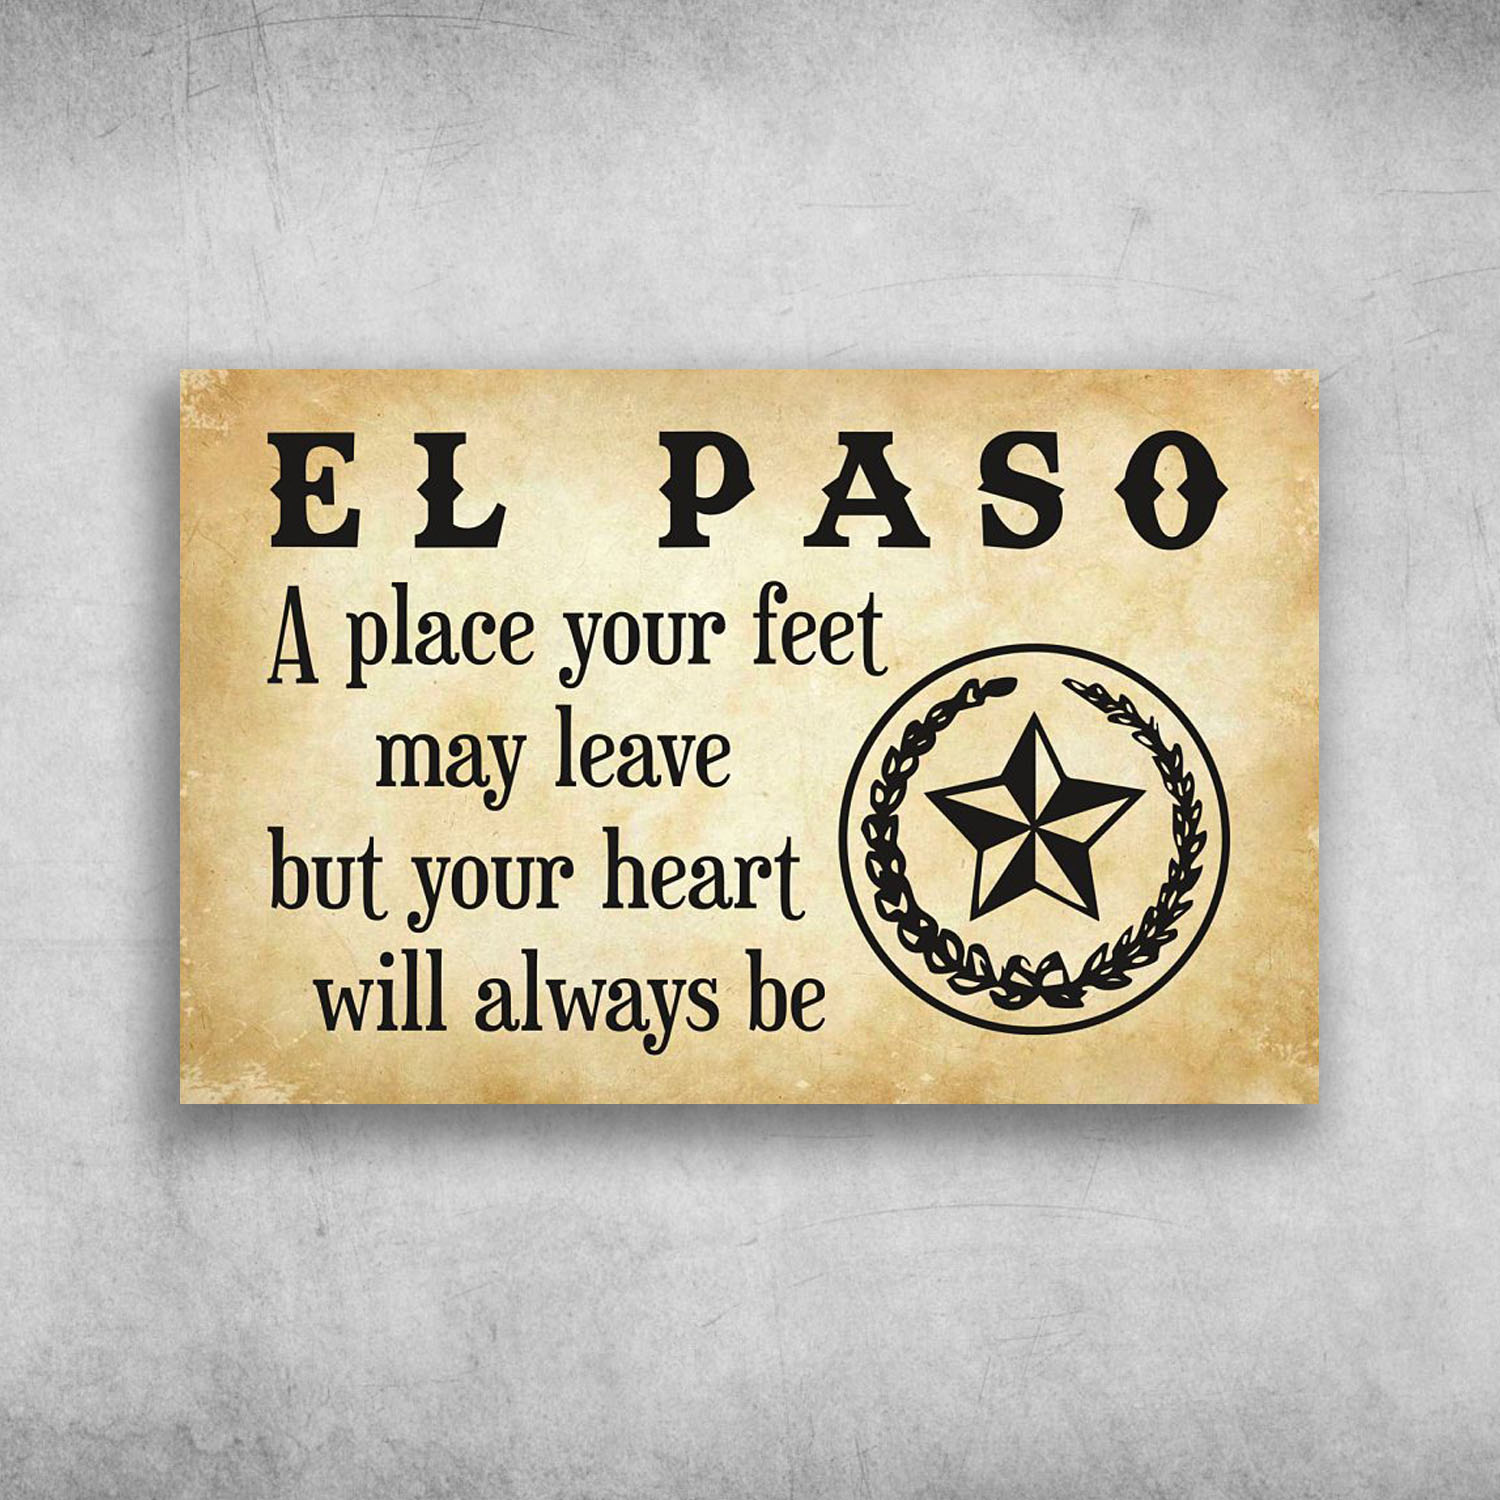 El Paso A Place Your Feet May Leave